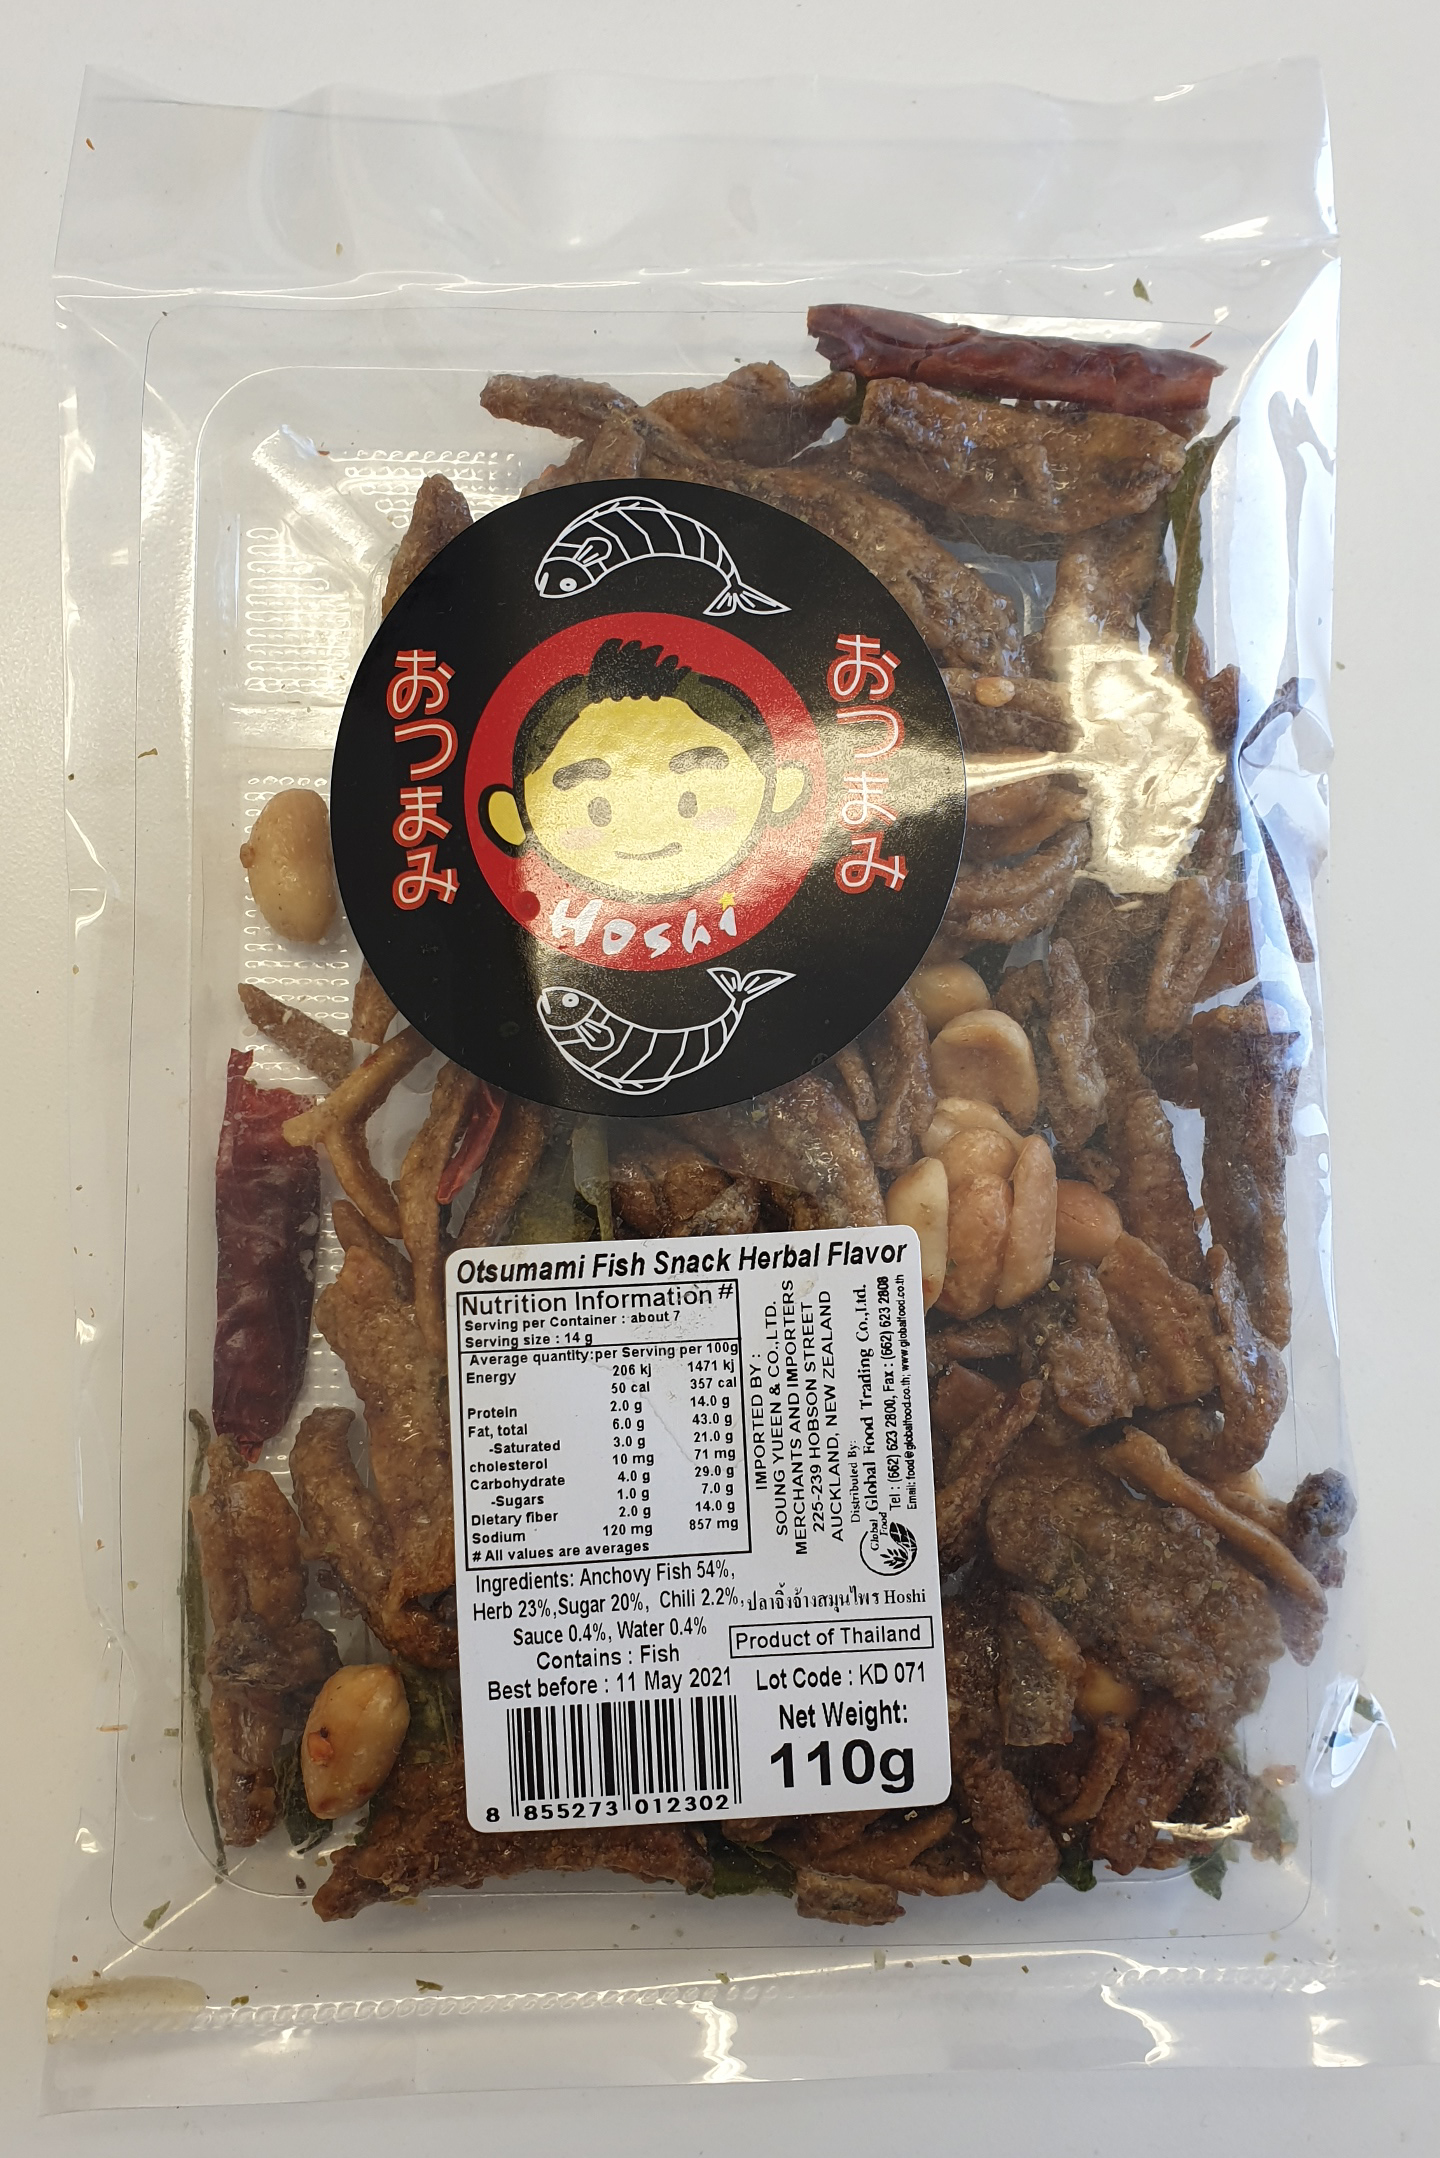 A pack of Hoshi brand Otsumami Fish Snack (Herbal Flavour) (110g).